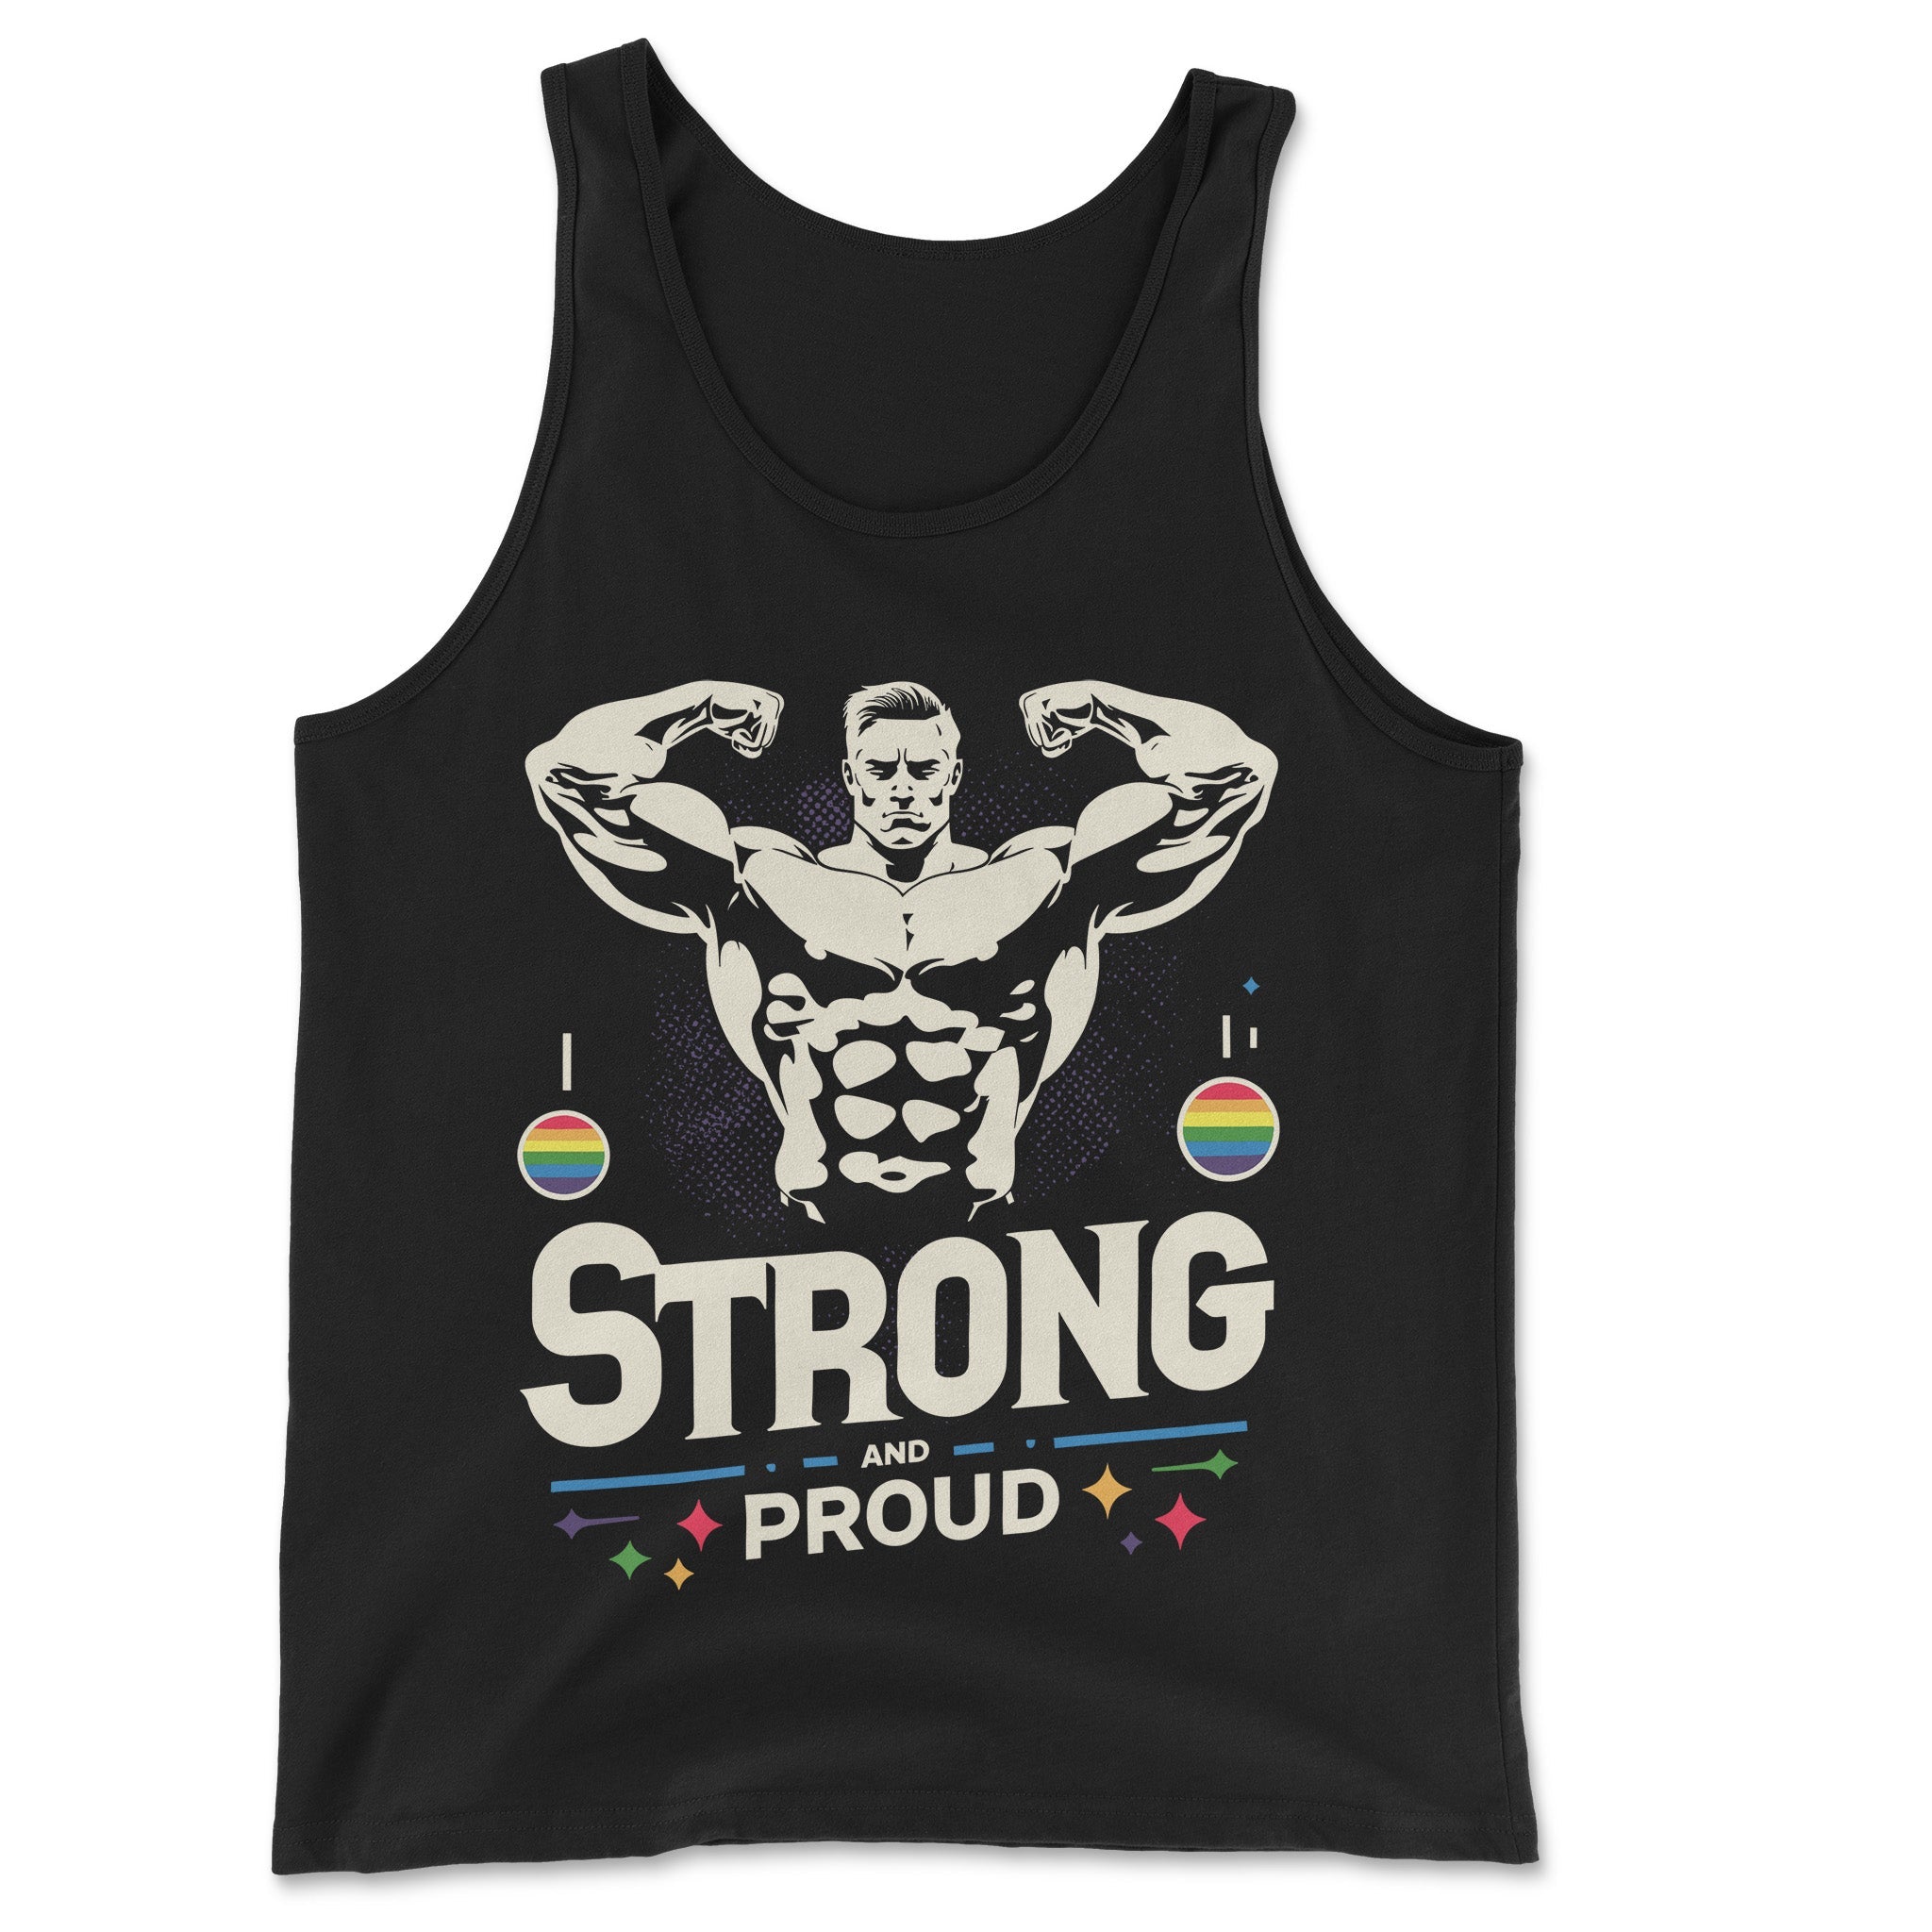 Strong and Proud Muscle Tank - Empowering LGBTQ+ Pride Top - Hunky Tops